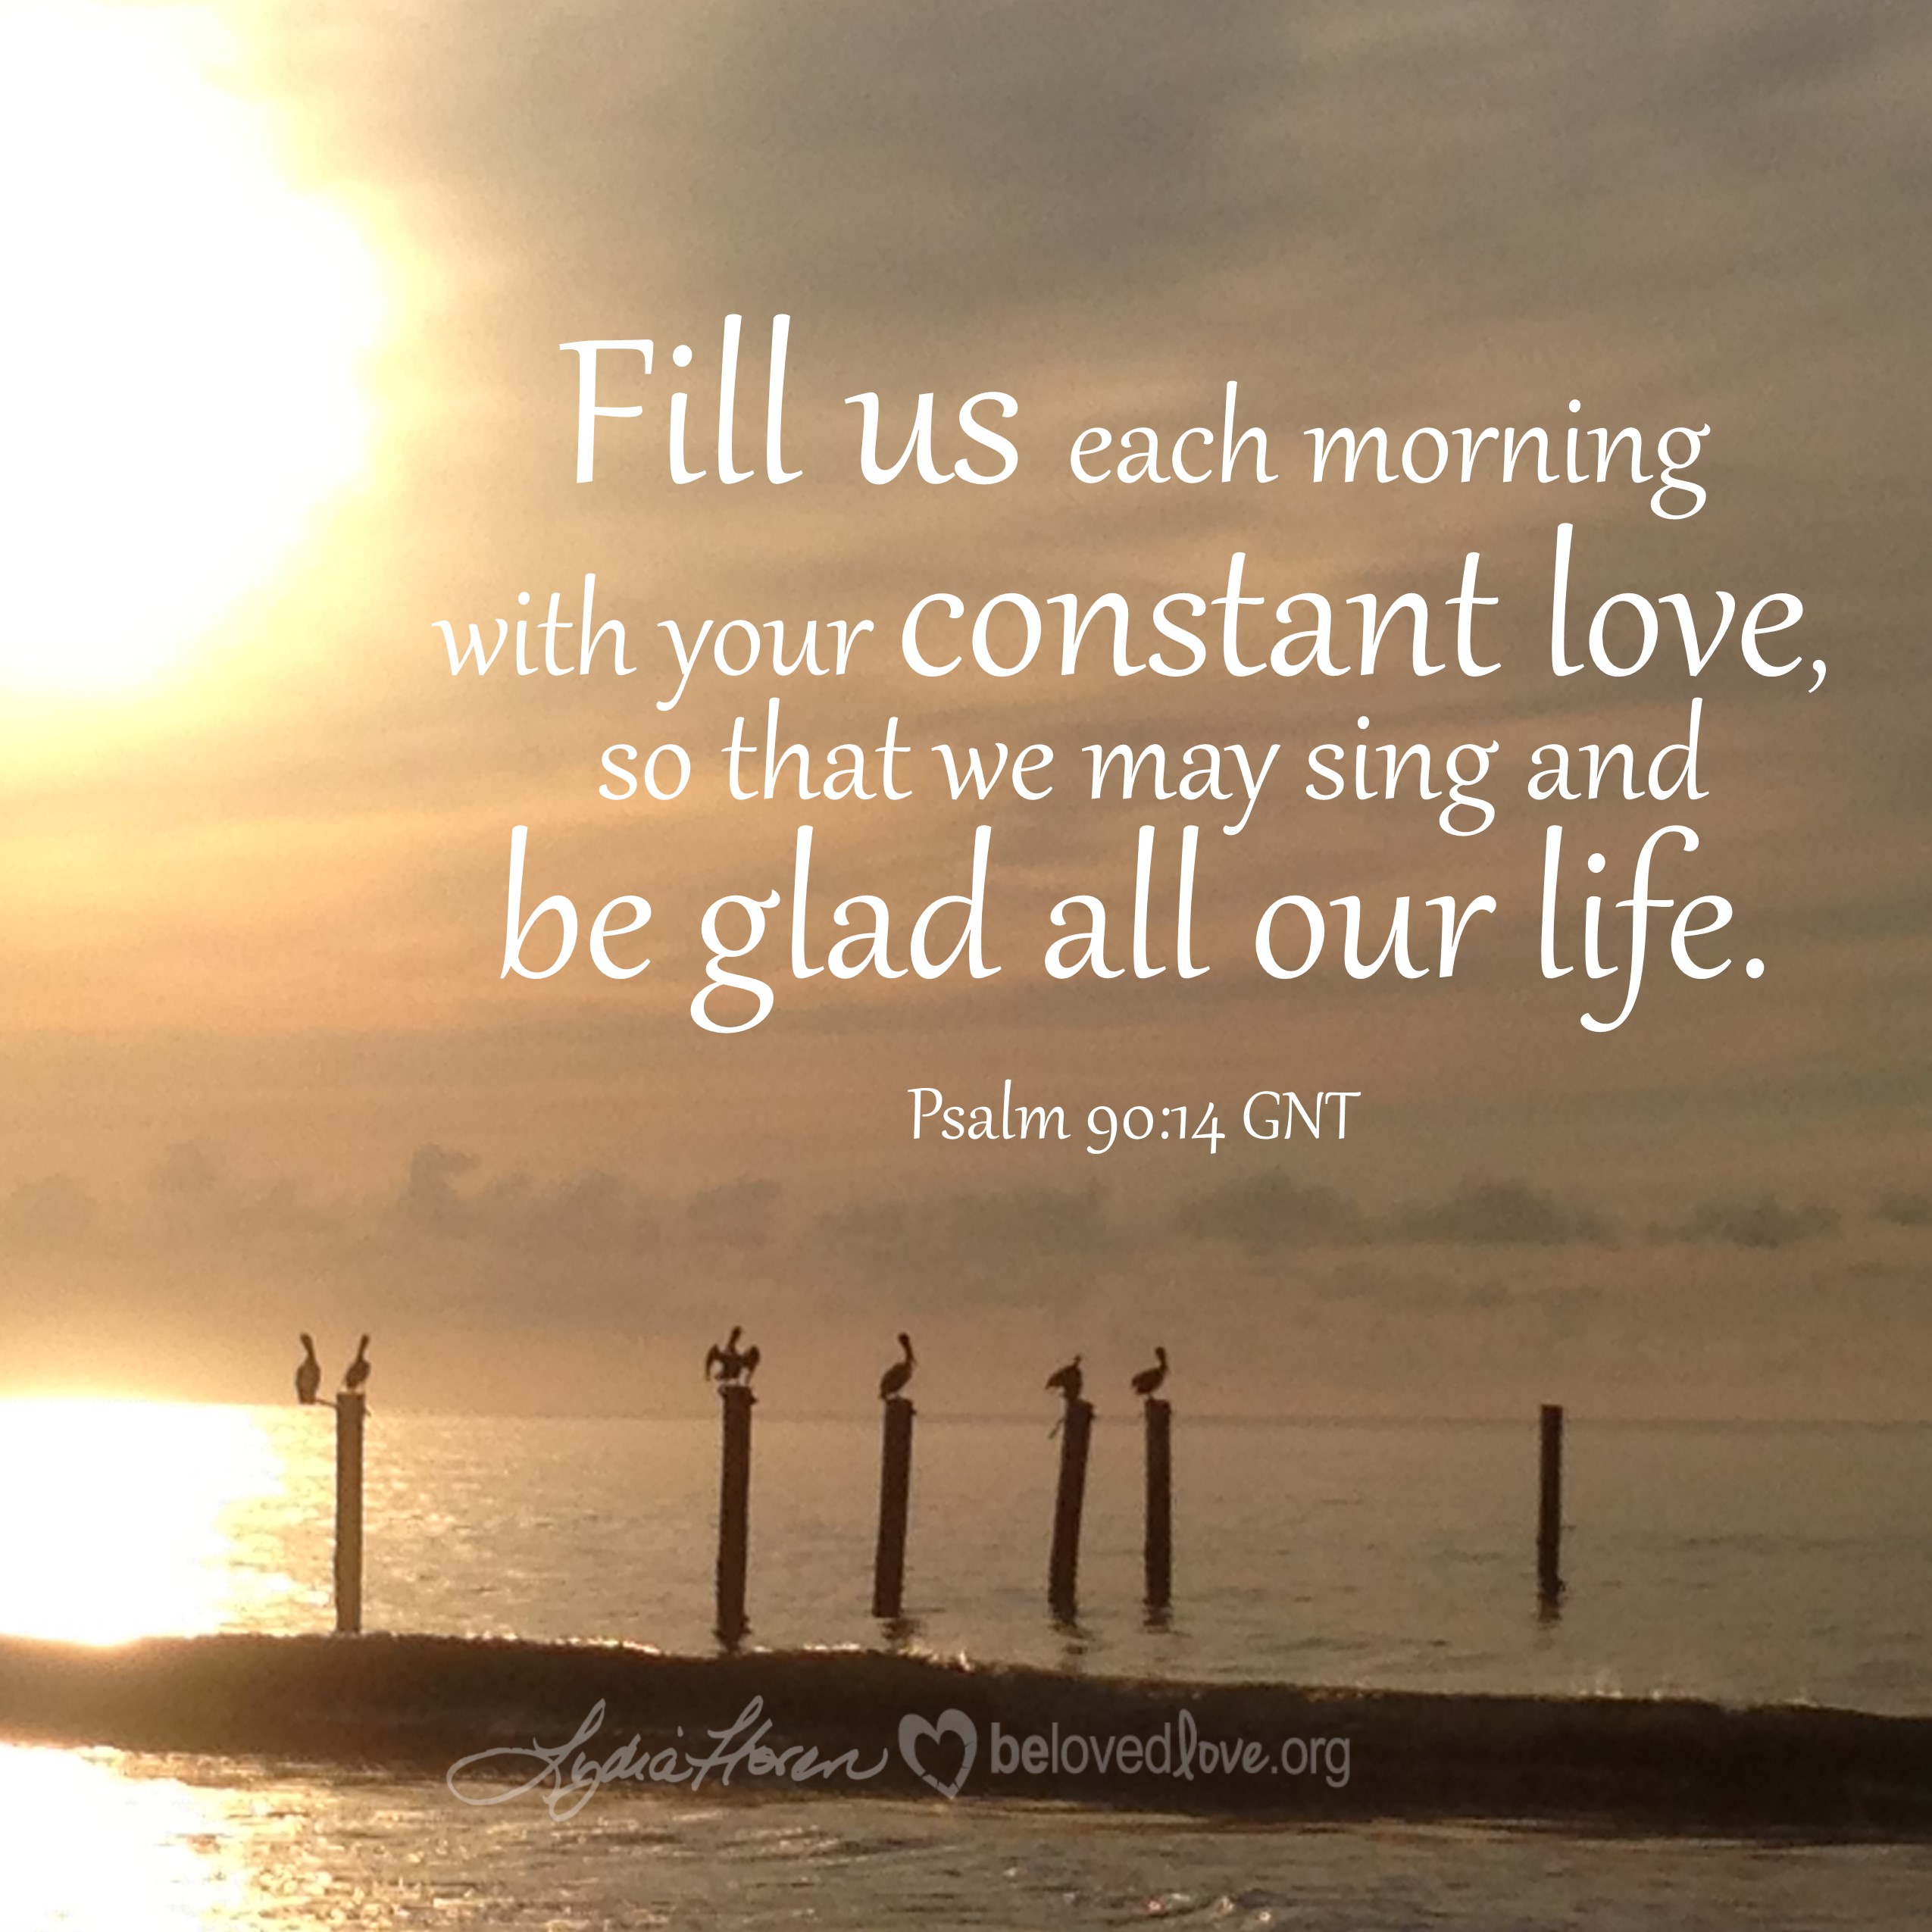 fill us each morning with your constant love, so that we may sing and be glad all our life